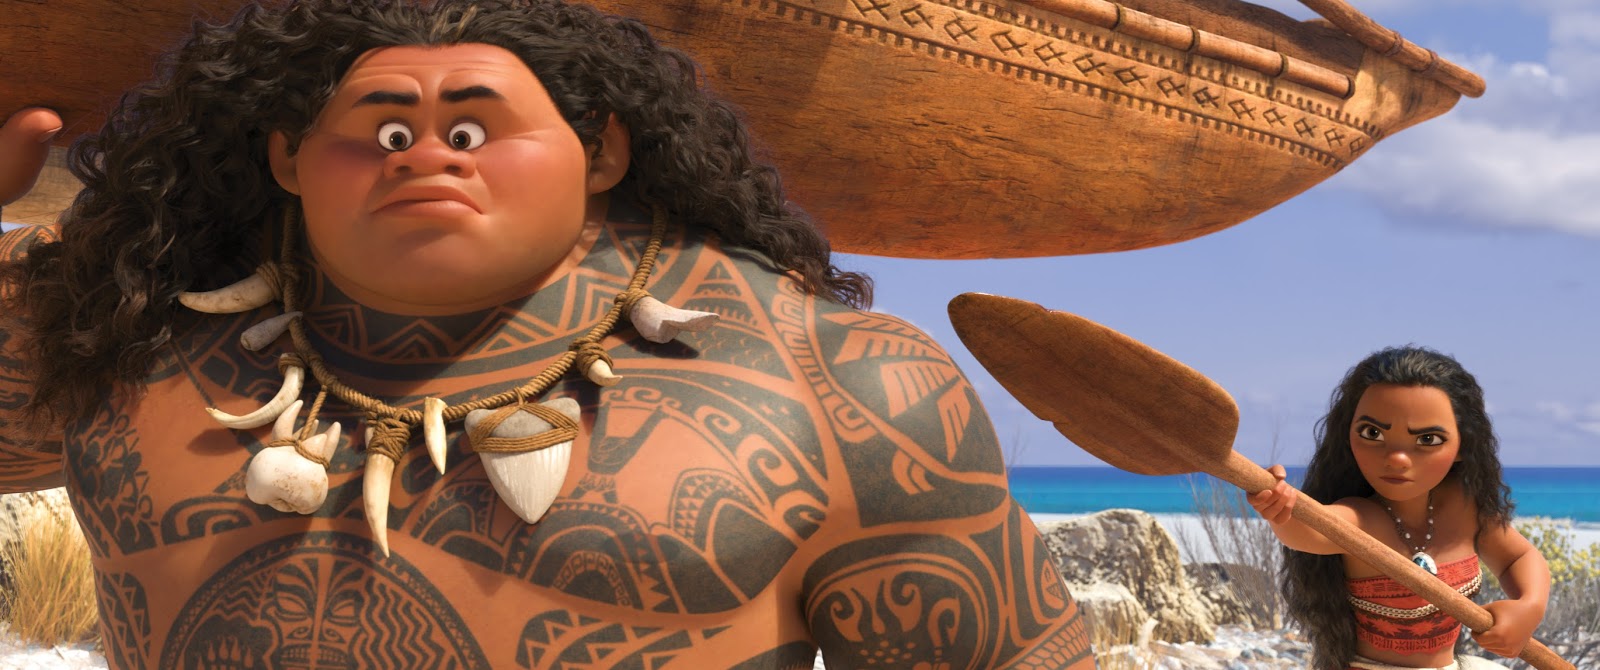 MOVIES: Moana - Review